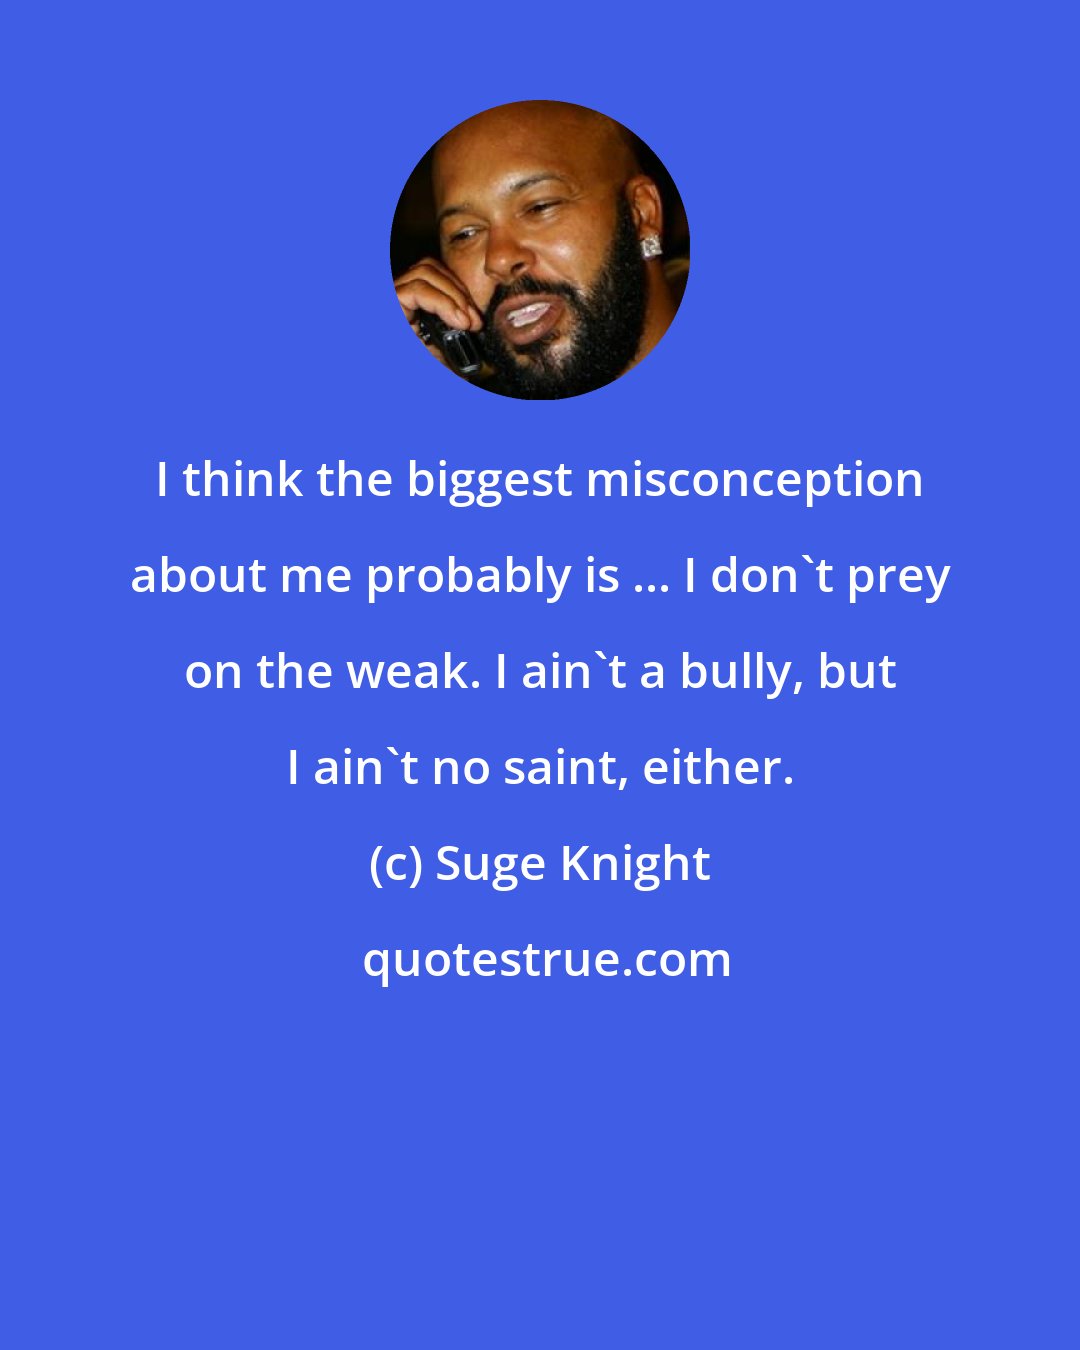 Suge Knight: I think the biggest misconception about me probably is ... I don't prey on the weak. I ain't a bully, but I ain't no saint, either.